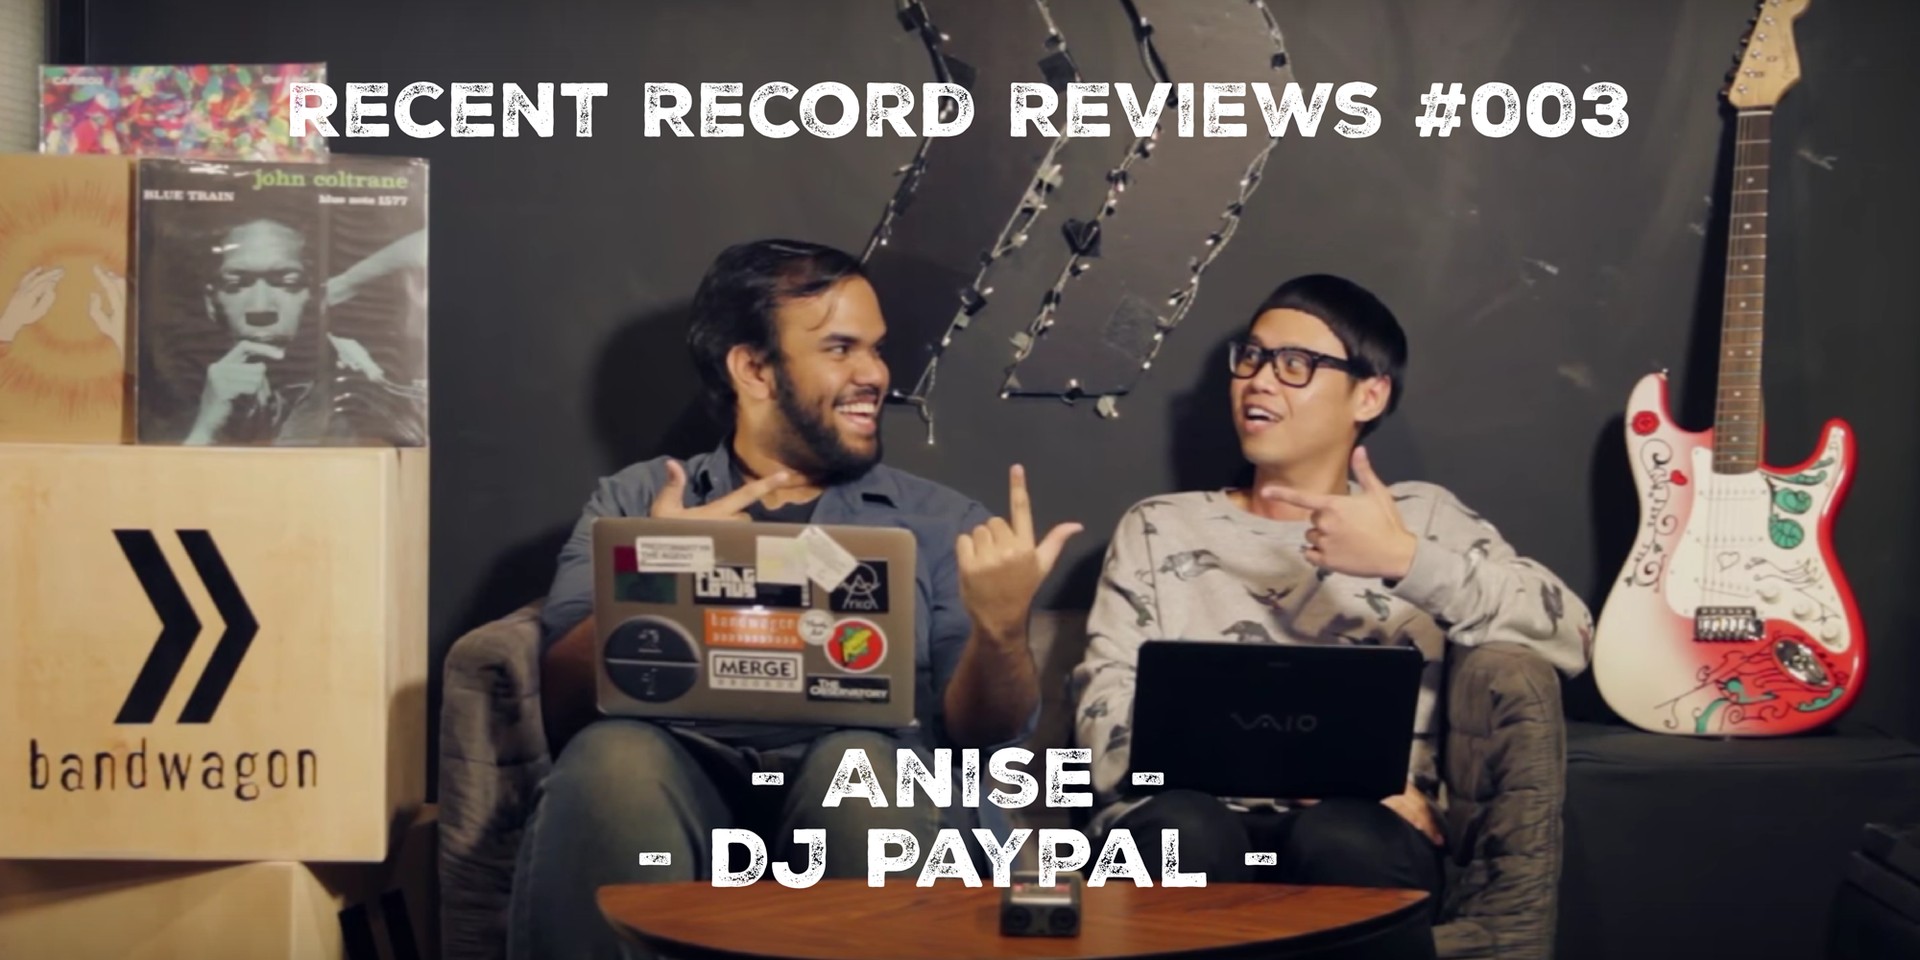 WATCH: Bandwagon Recent Record Reviews #003 - Anise, DJ Paypal